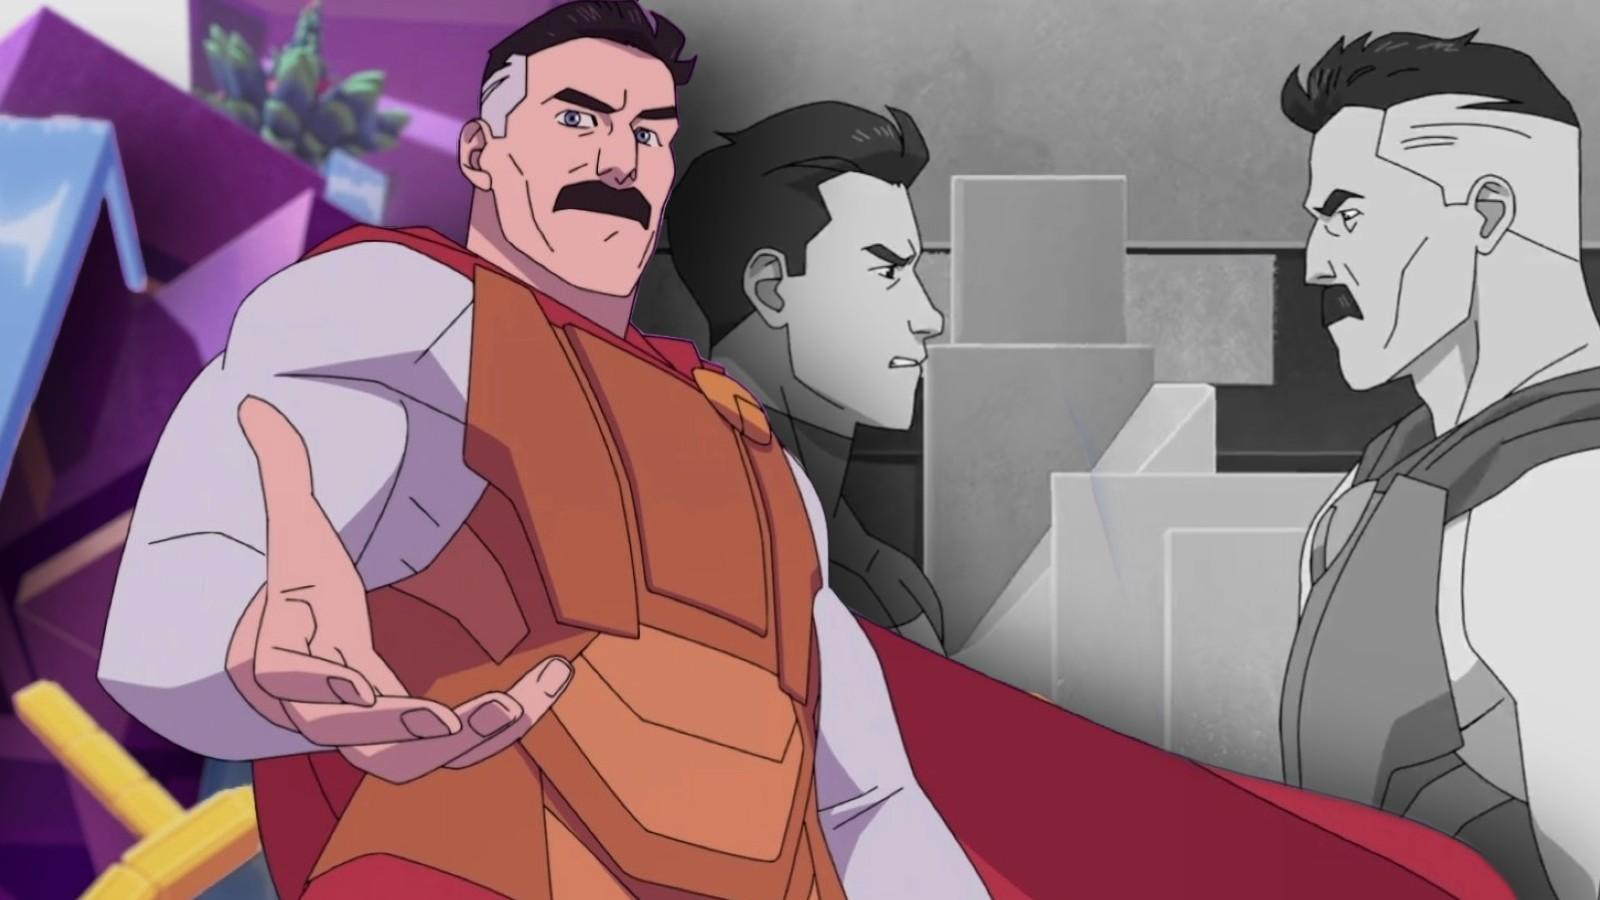 Omni-Man in Invincible Season 2 and a still from the Episode 4 teaser trailer